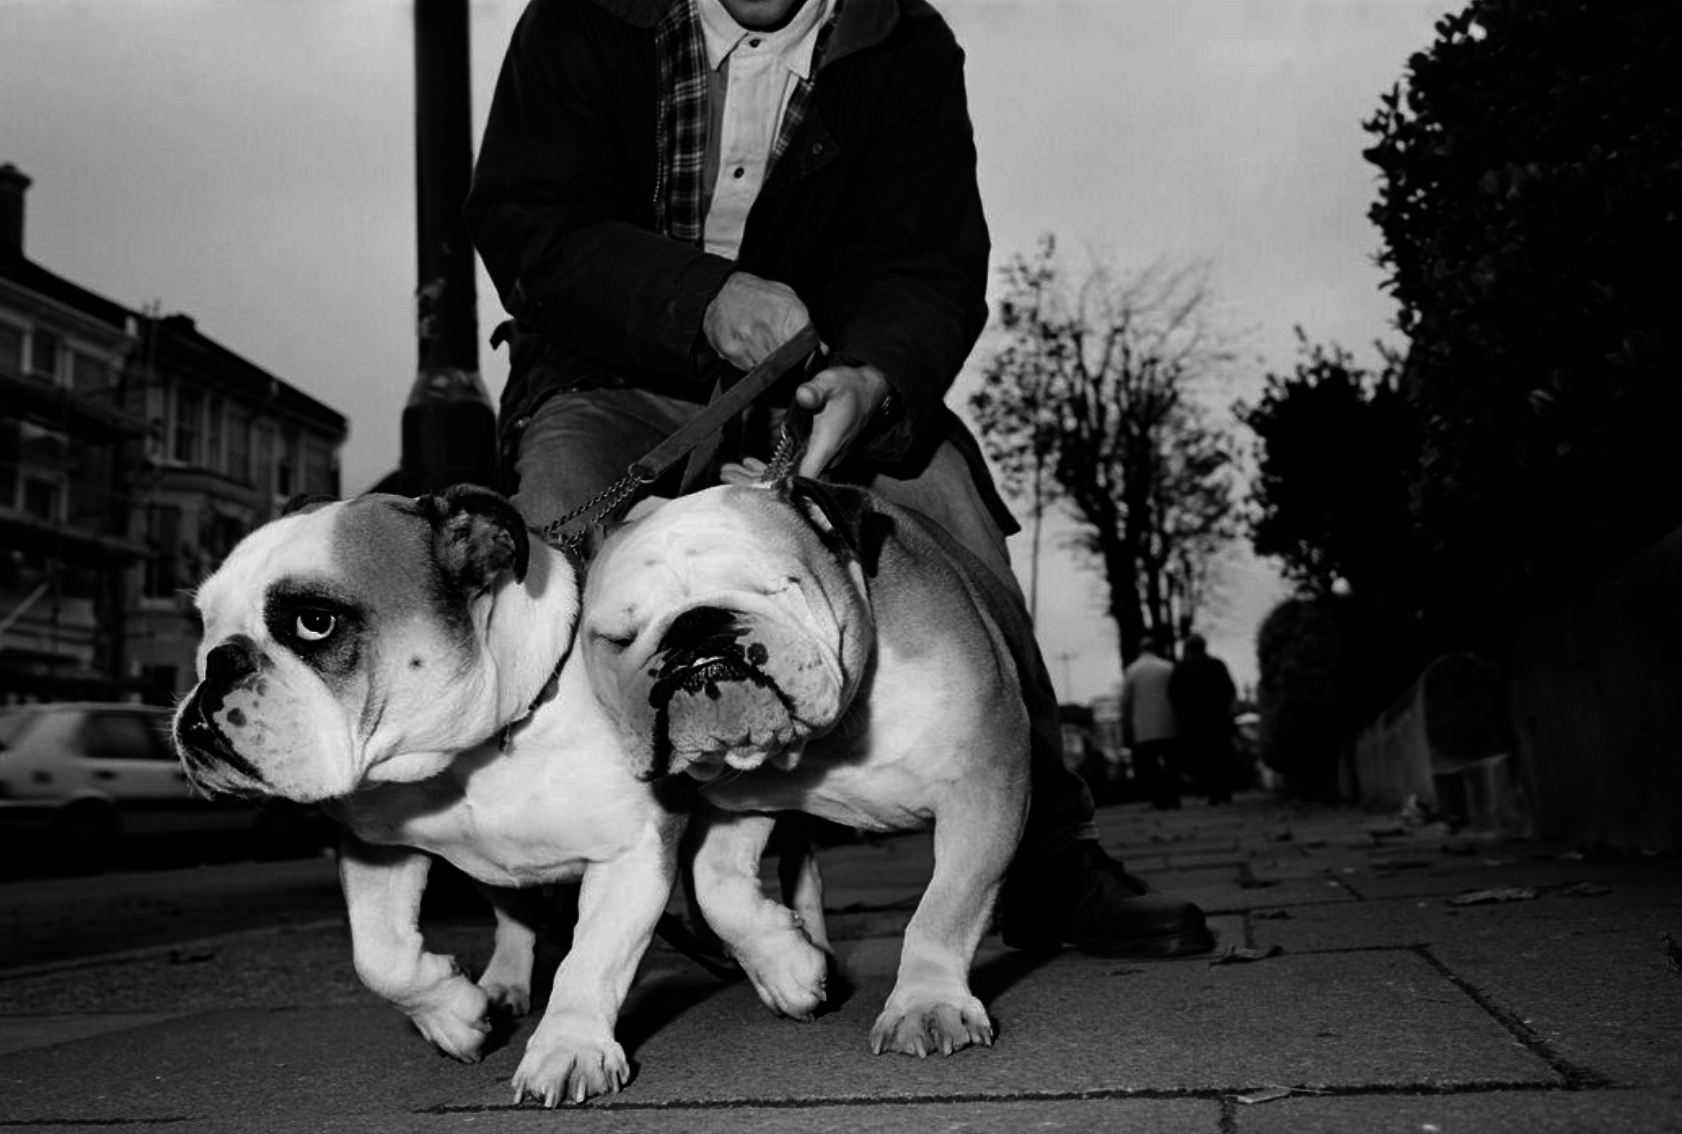 Two bulldogs seen pulling on a leash as they take a walk